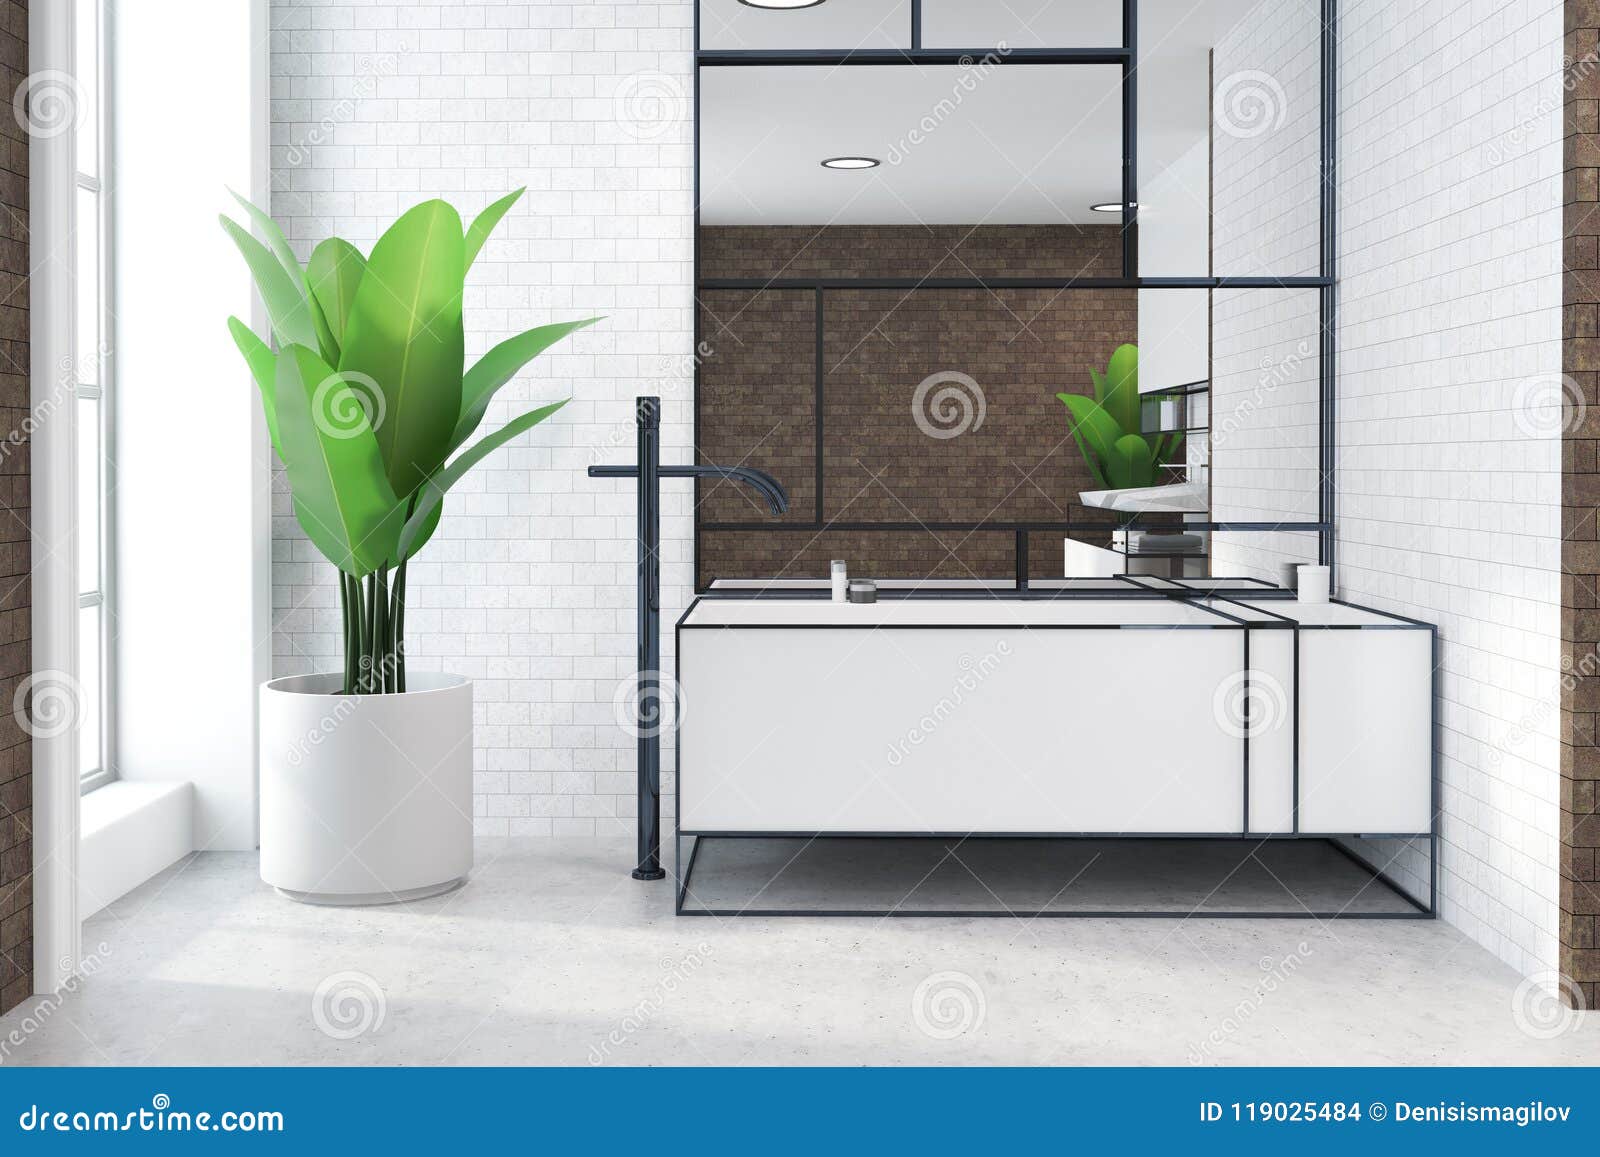 bathroom sink with plant